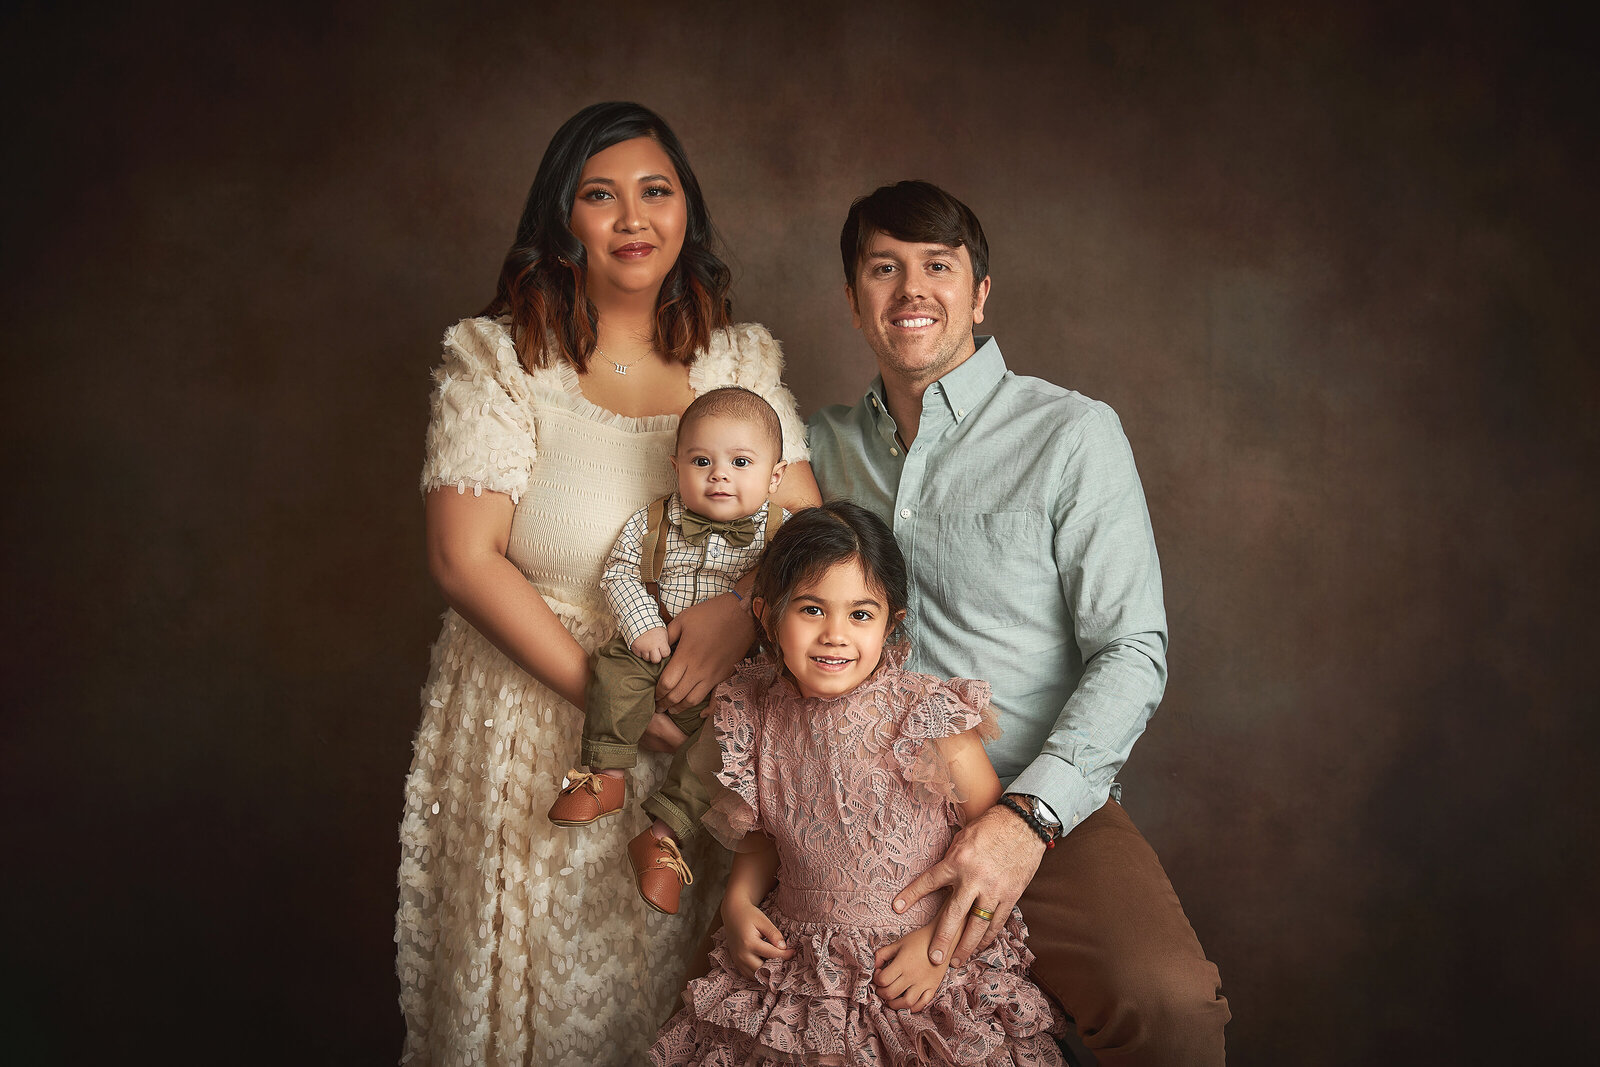 Family Photo Gallery - JCPenney Portraits | Studio family portraits, Family  portrait outfits, Family portrait poses